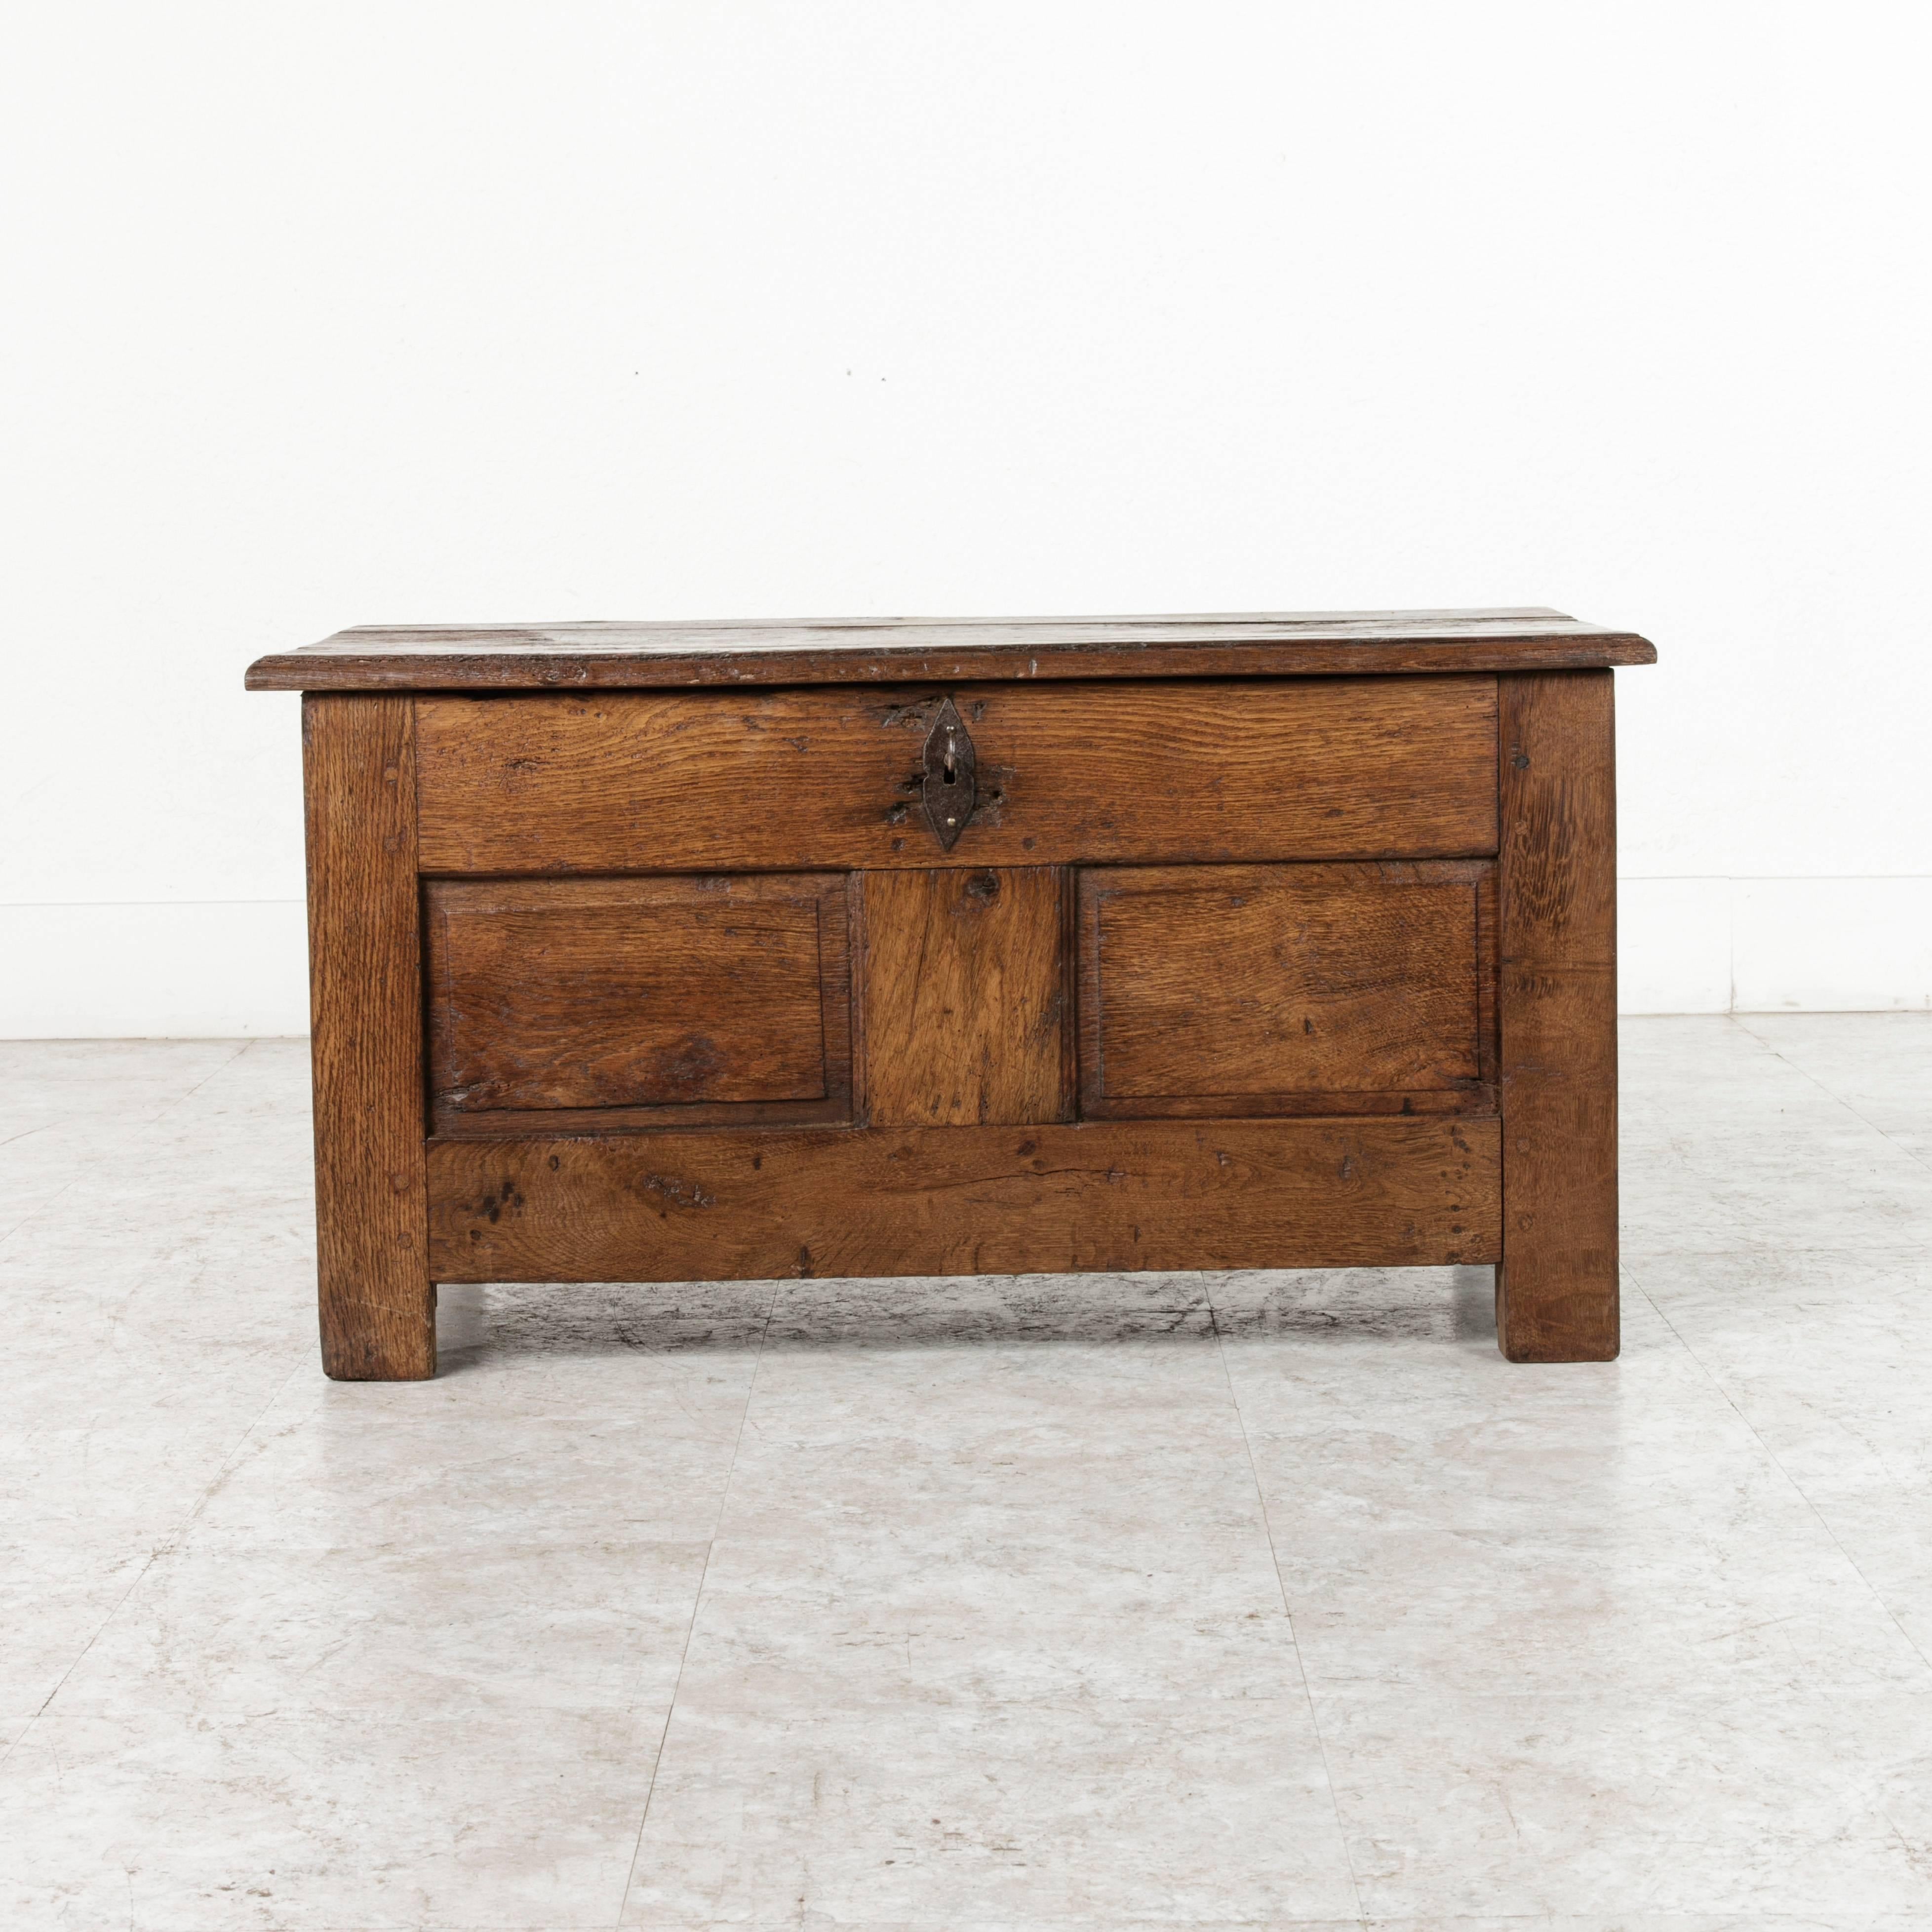 This 19th century oak coffer with its hinged top and sturdy, hand pegged construction wears proudly its marks of character that come from age and use. Its interior contains a smaller compartment, also with hinged lid, where small necessities for the